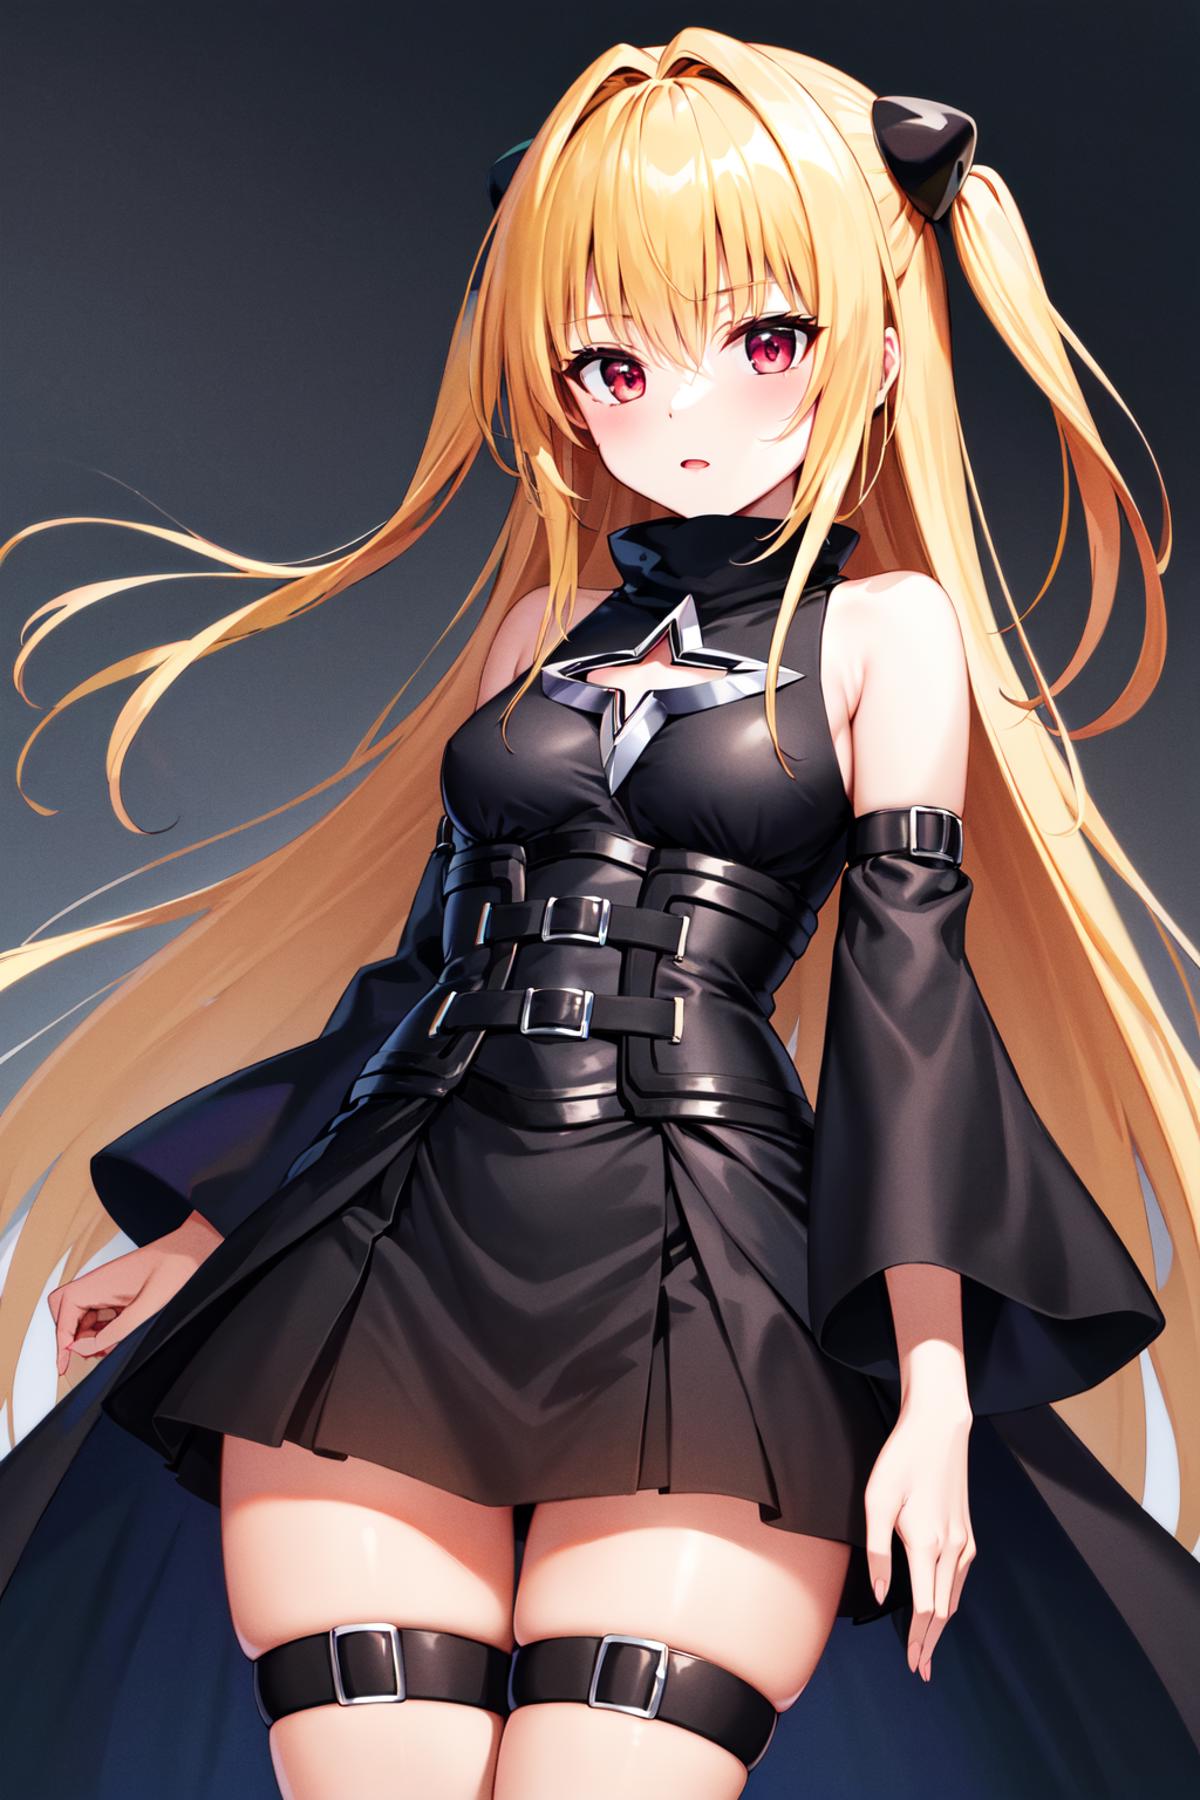 Anime girl with long blonde hair wearing a black dress and black boots.